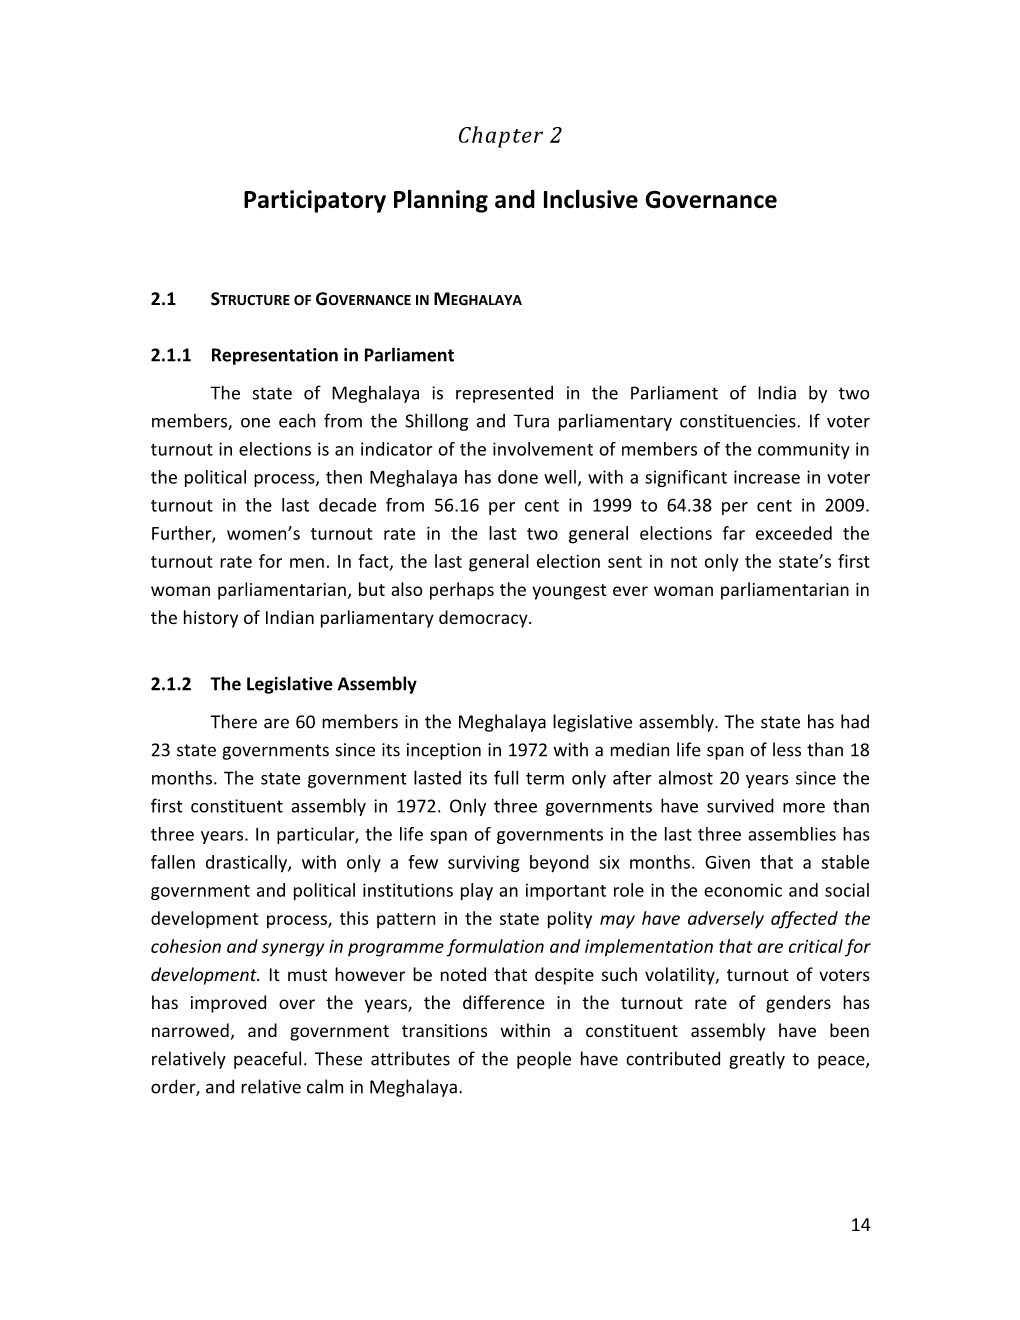 Chapter 2: Participatory Planning and Inclusive Governance